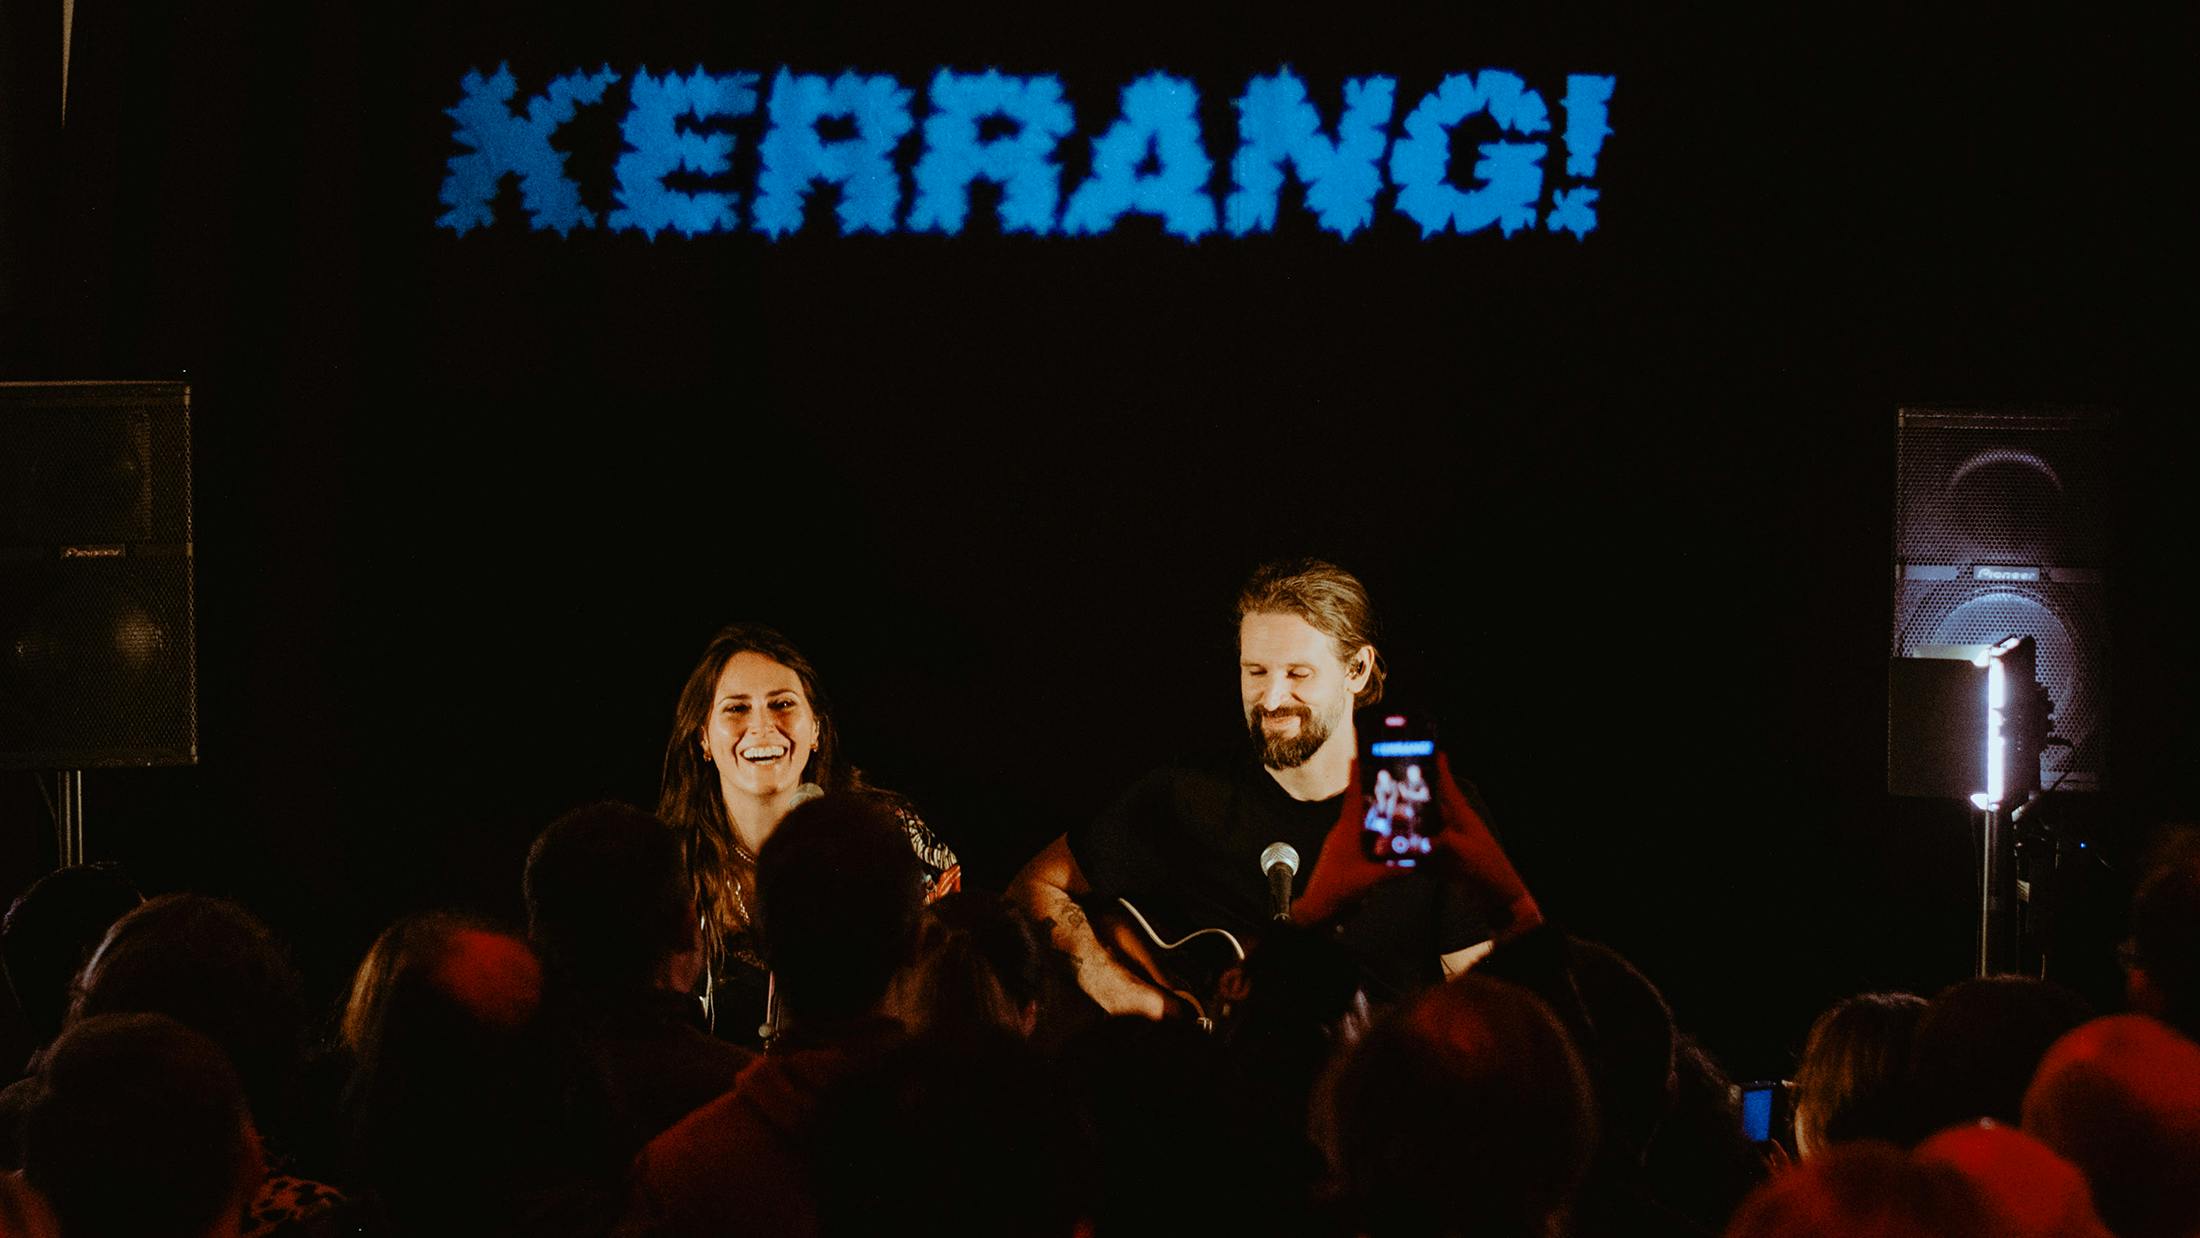 In pictures: The Kerrang! x Within Temptation album launch party